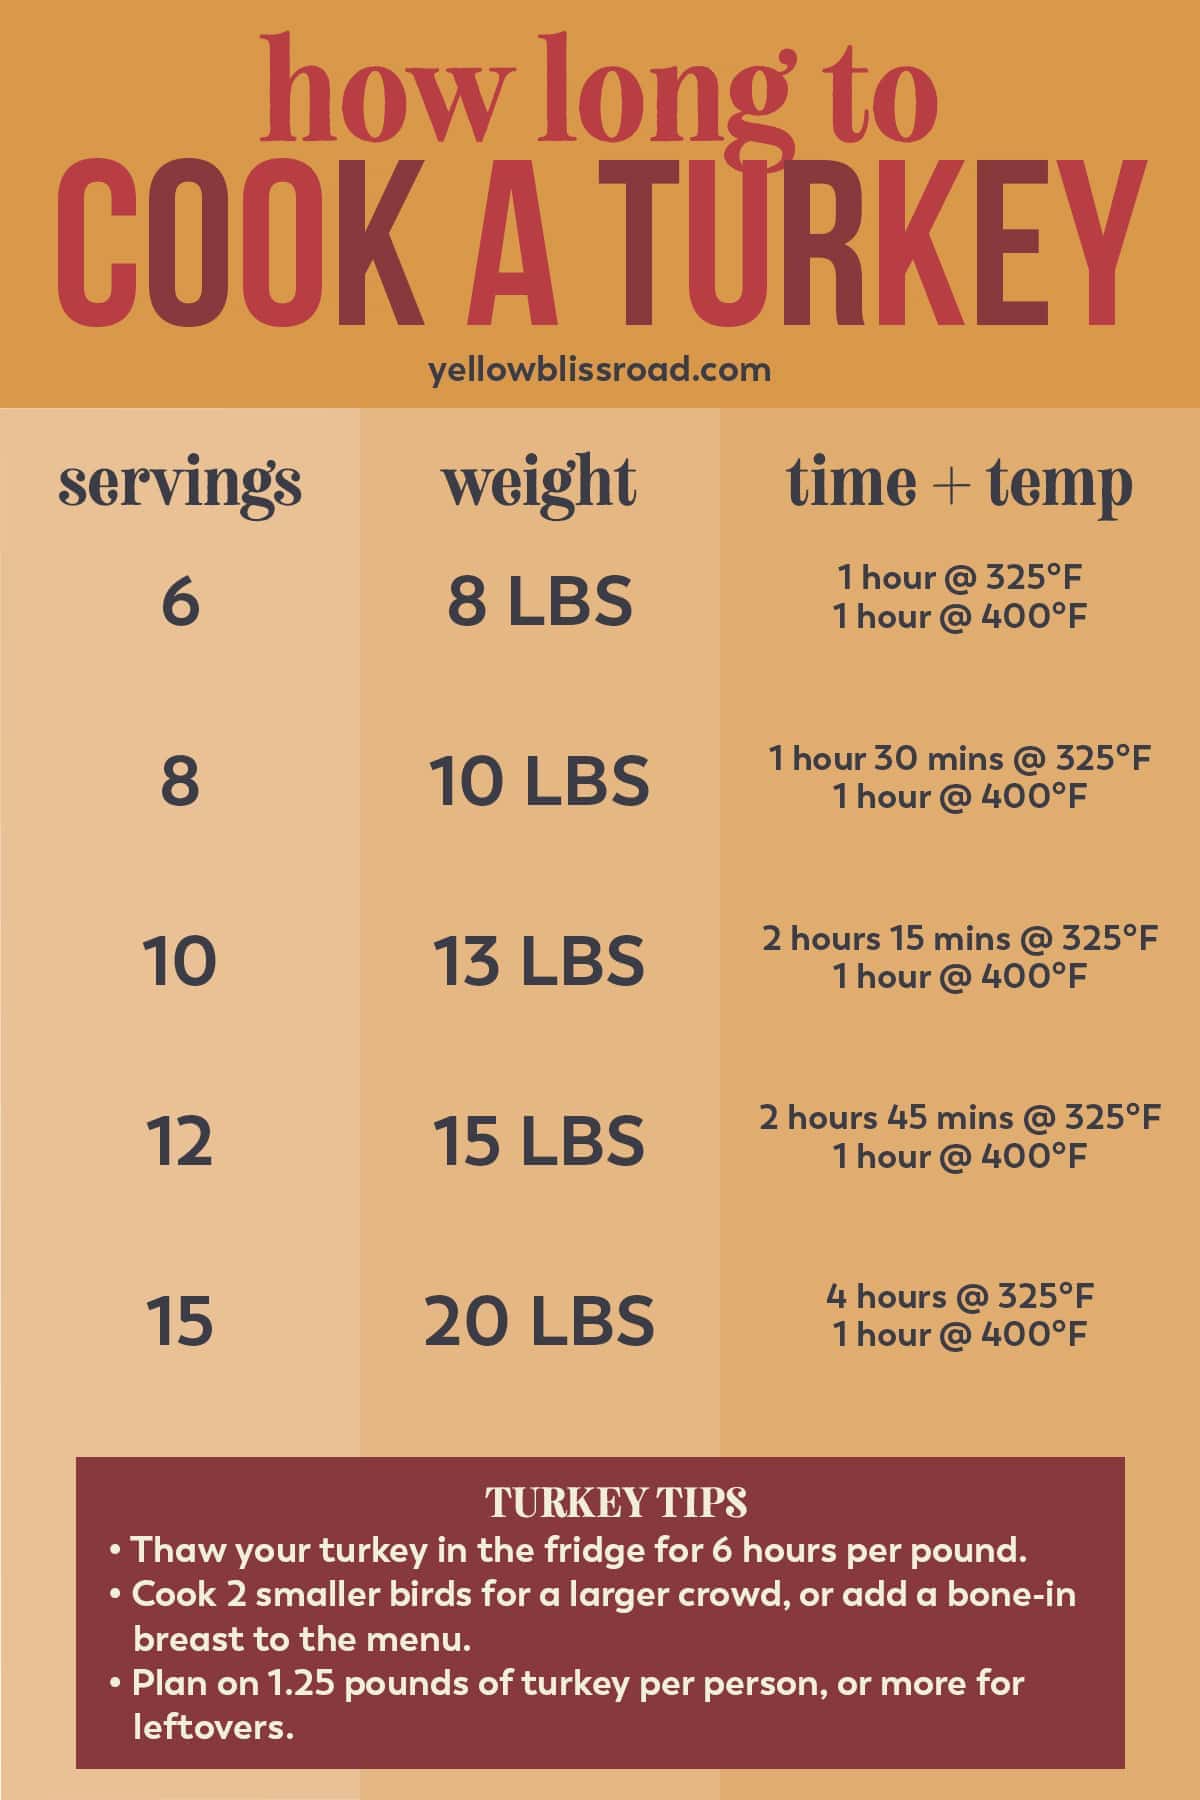 graphic showing how to cook a turkey with times, temps and how many servings